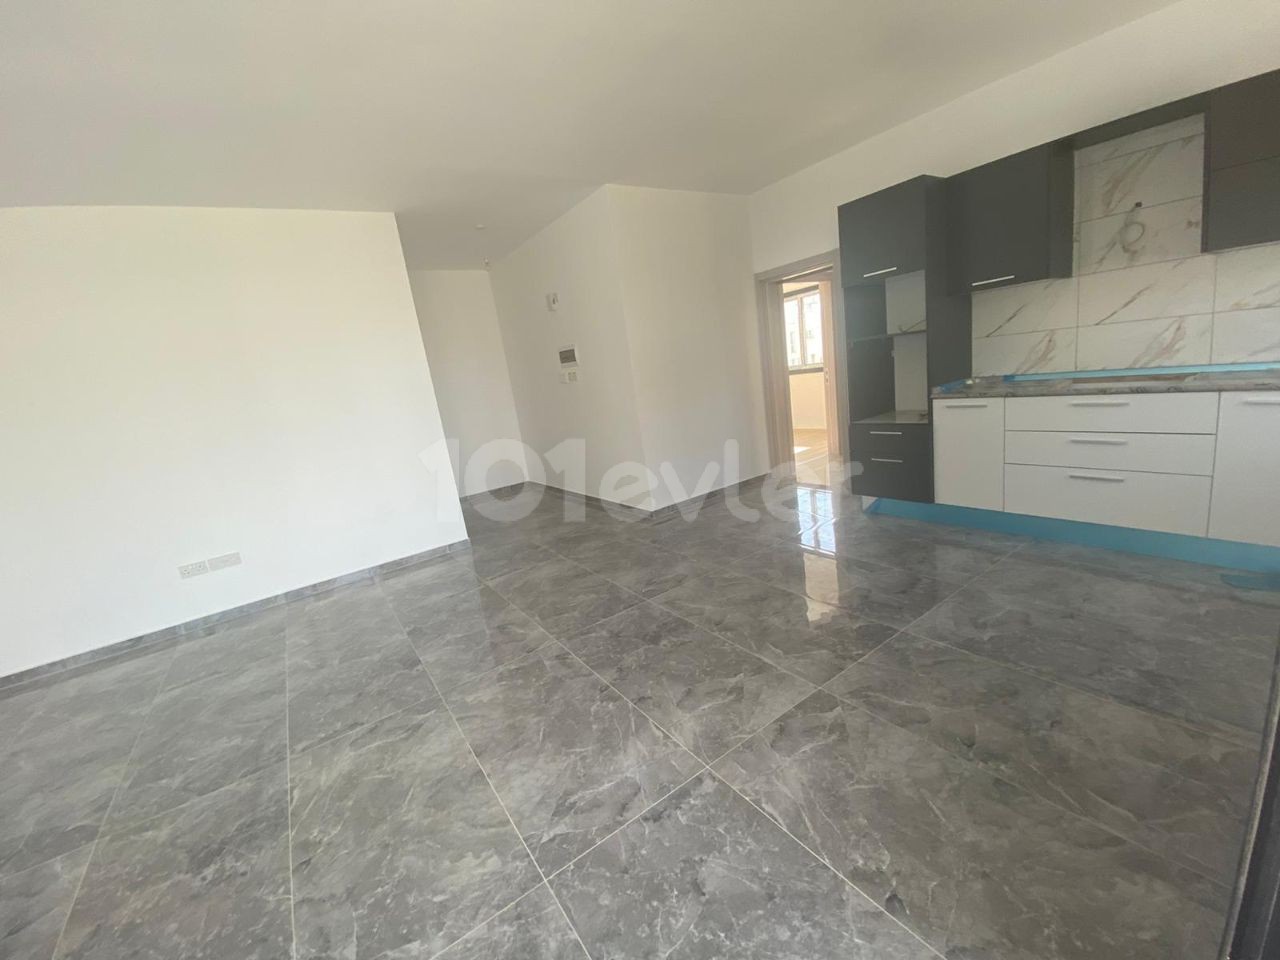 Penthouse Apartment for Sale in Nicosia Mitreli 2 + 1, 85 m2 + 70 m2 (Terrace) in the Central Location 60.000 STG ** 